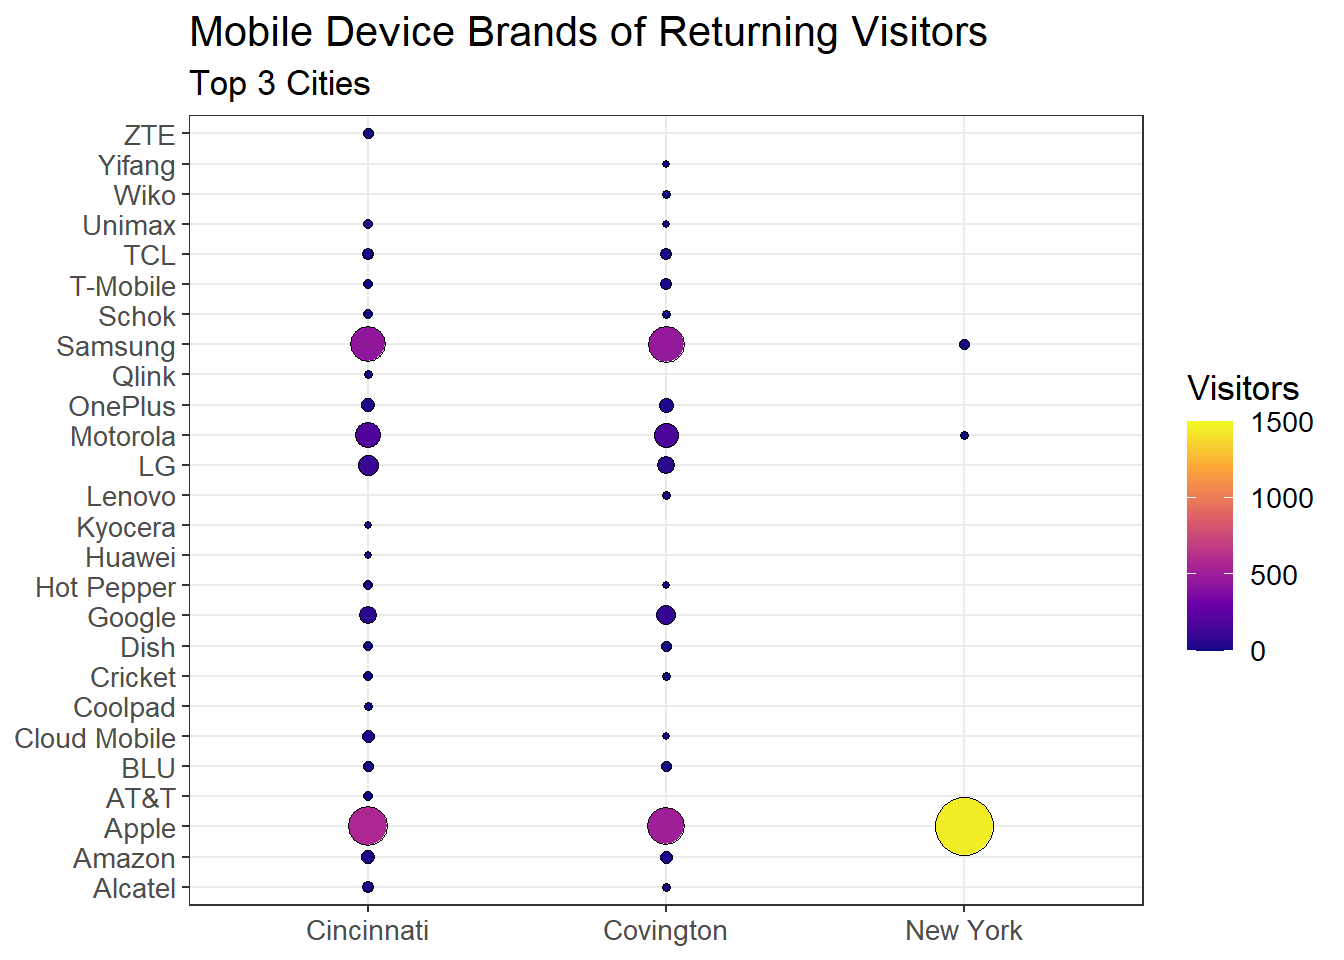 Popularity of Mobile Brands